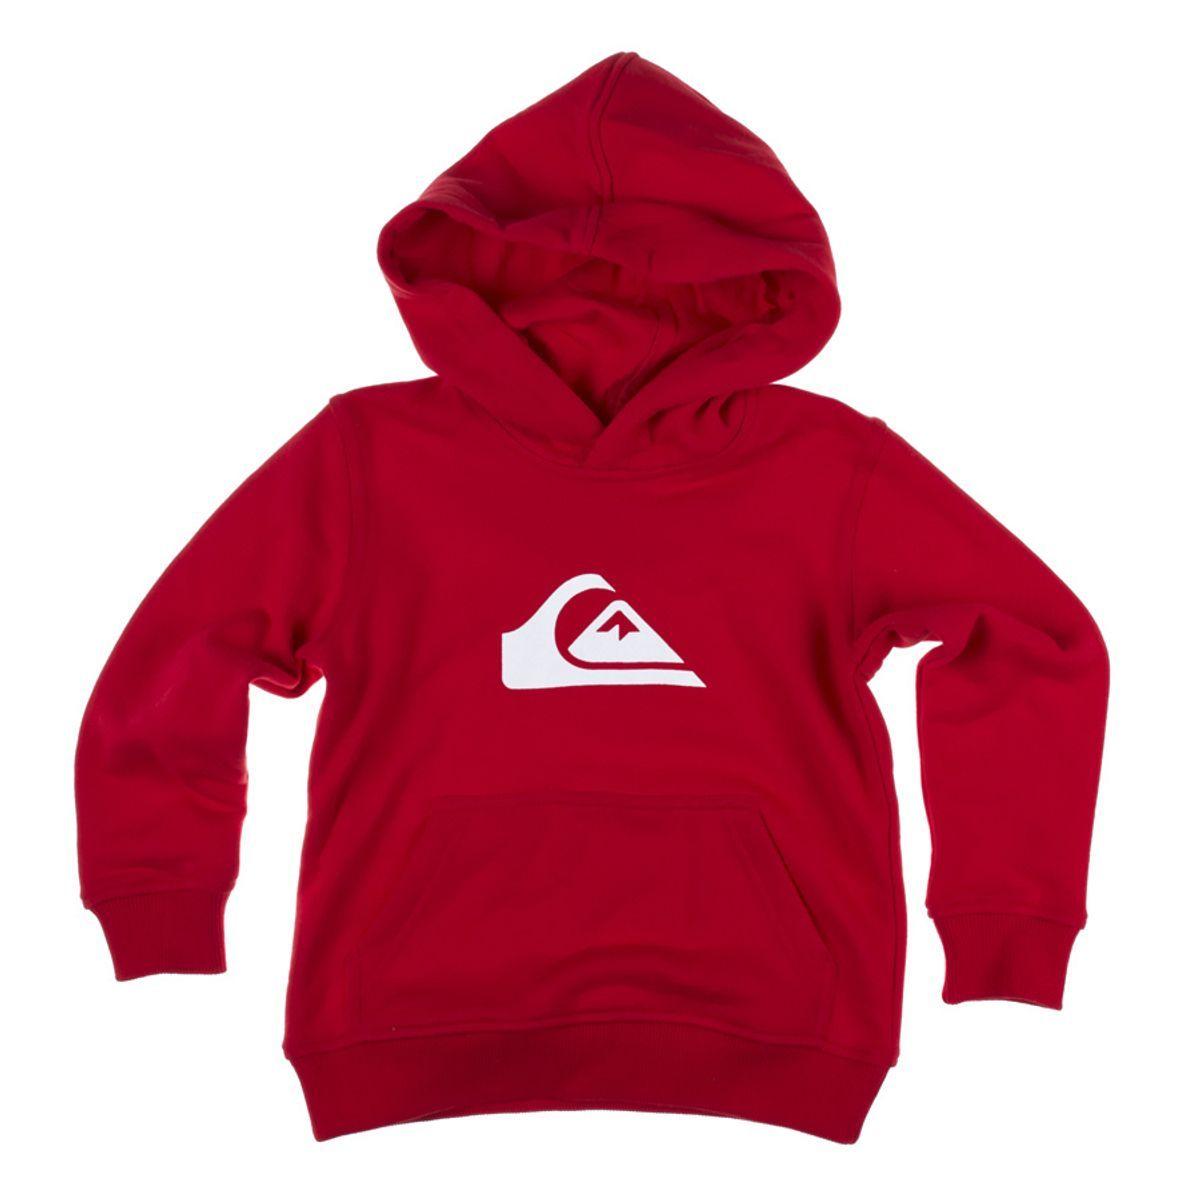 Wave and Red Mountain Logo - Quiksilver Logo Mountain And Waves Toddler Hoody - Quik Red | Free ...